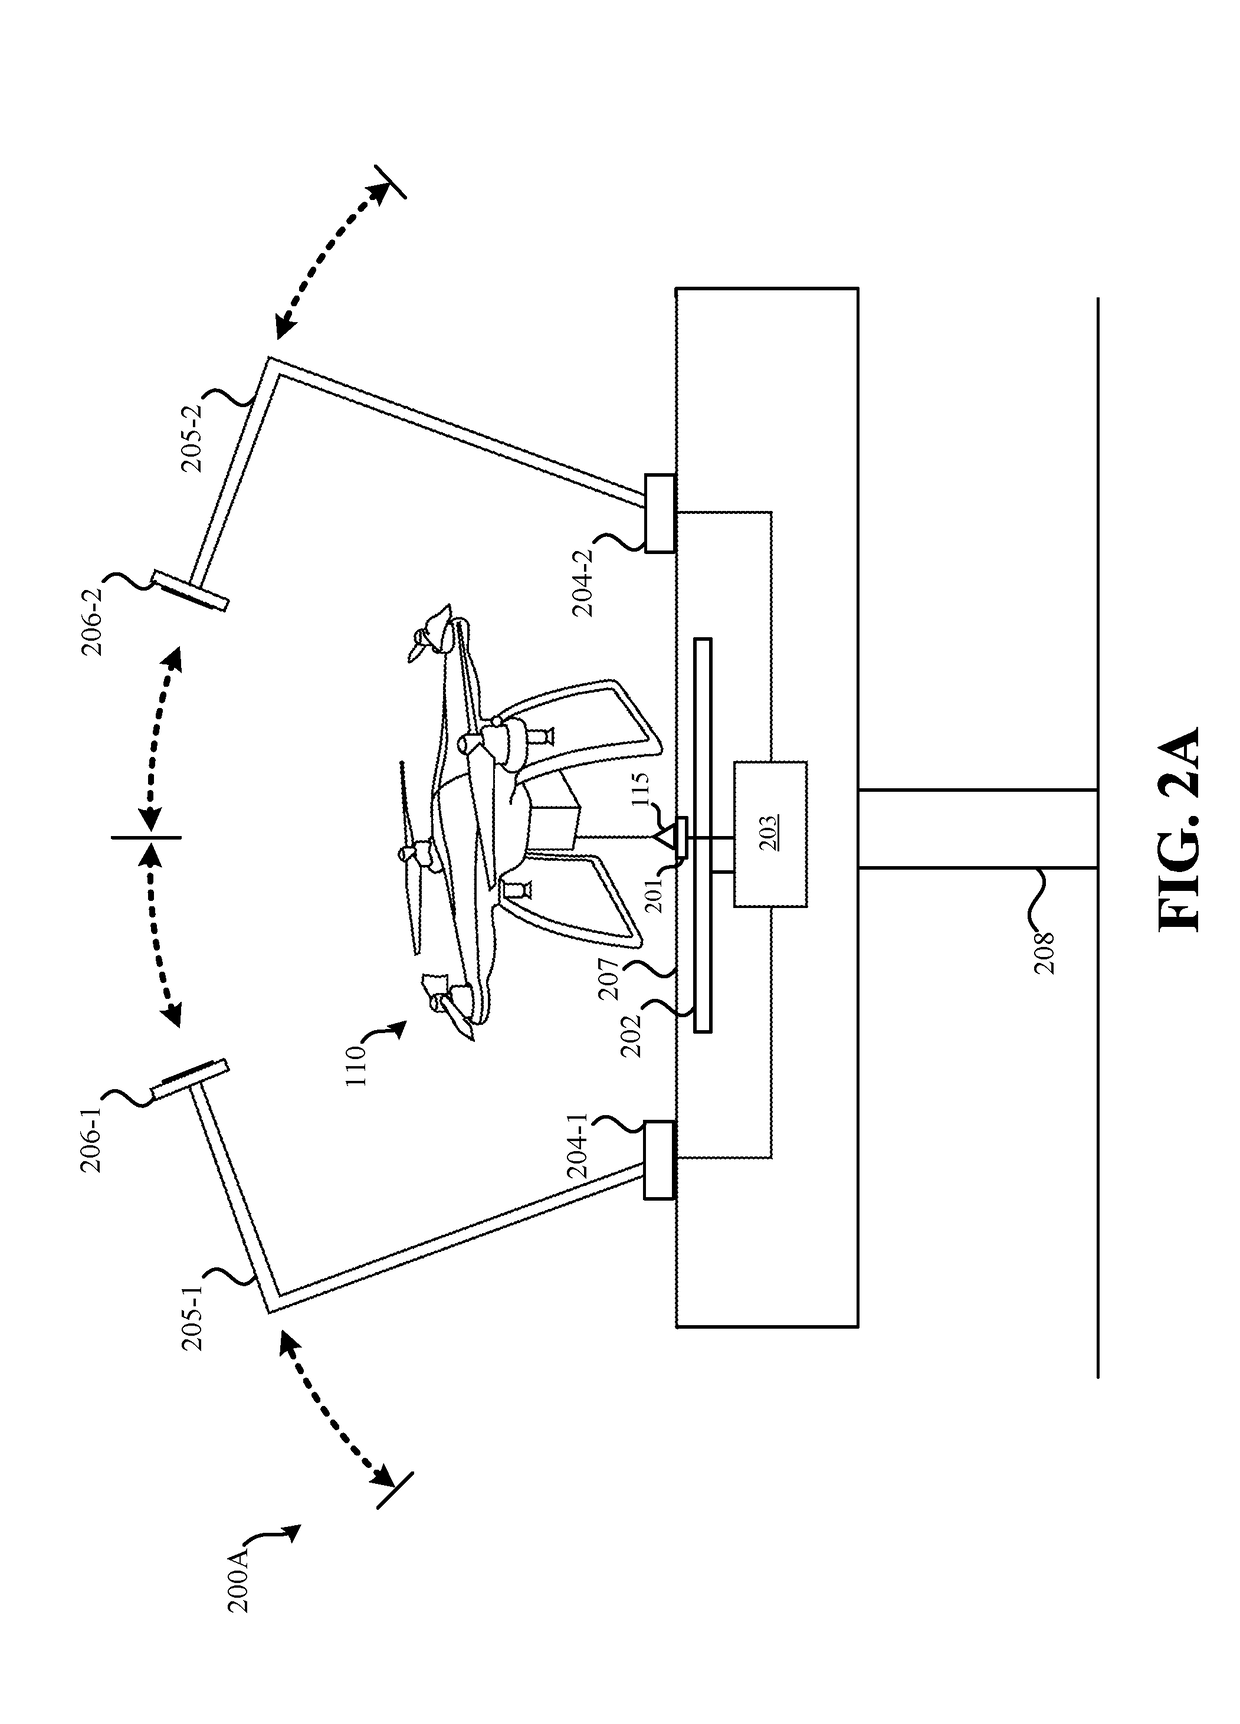 Midair Tethering of an Unmanned Aerial Vehicle with a Docking Station